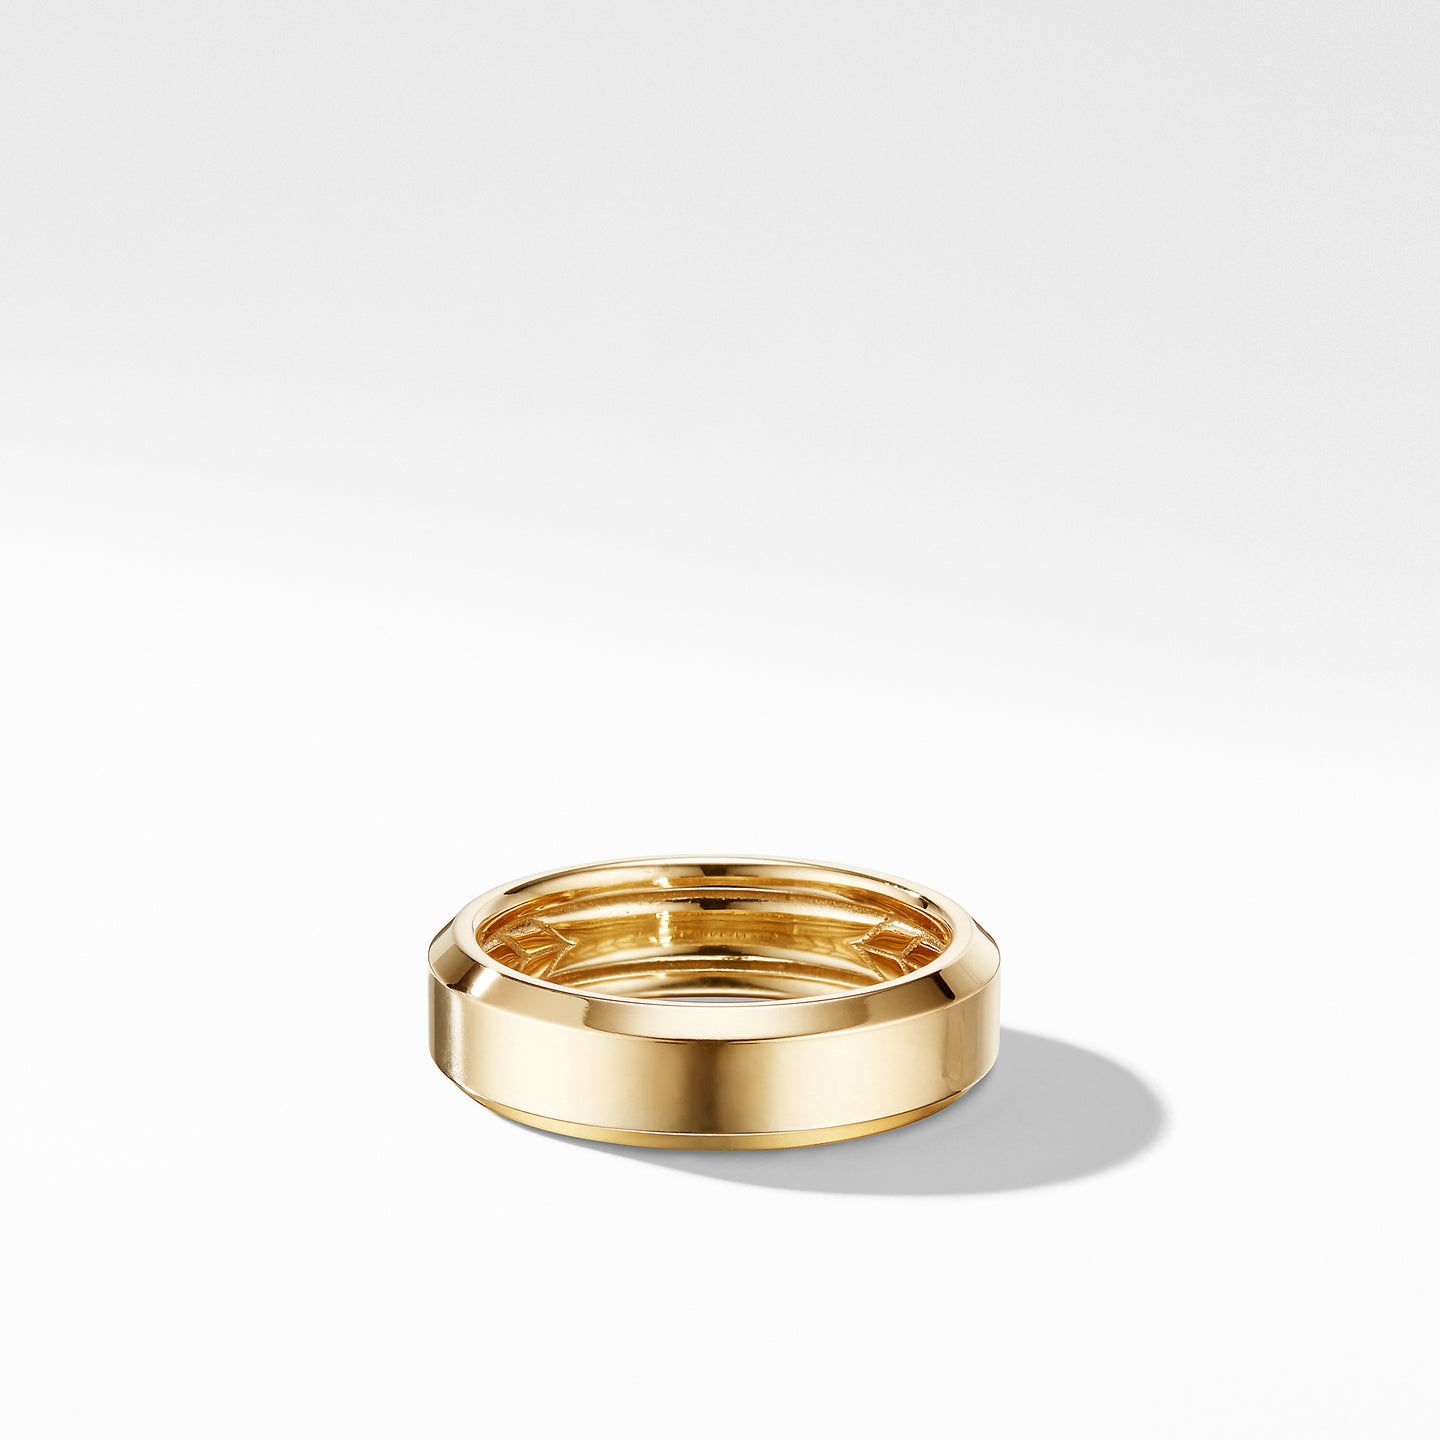 6mm Beveled Band Ring in 18K, Size 11